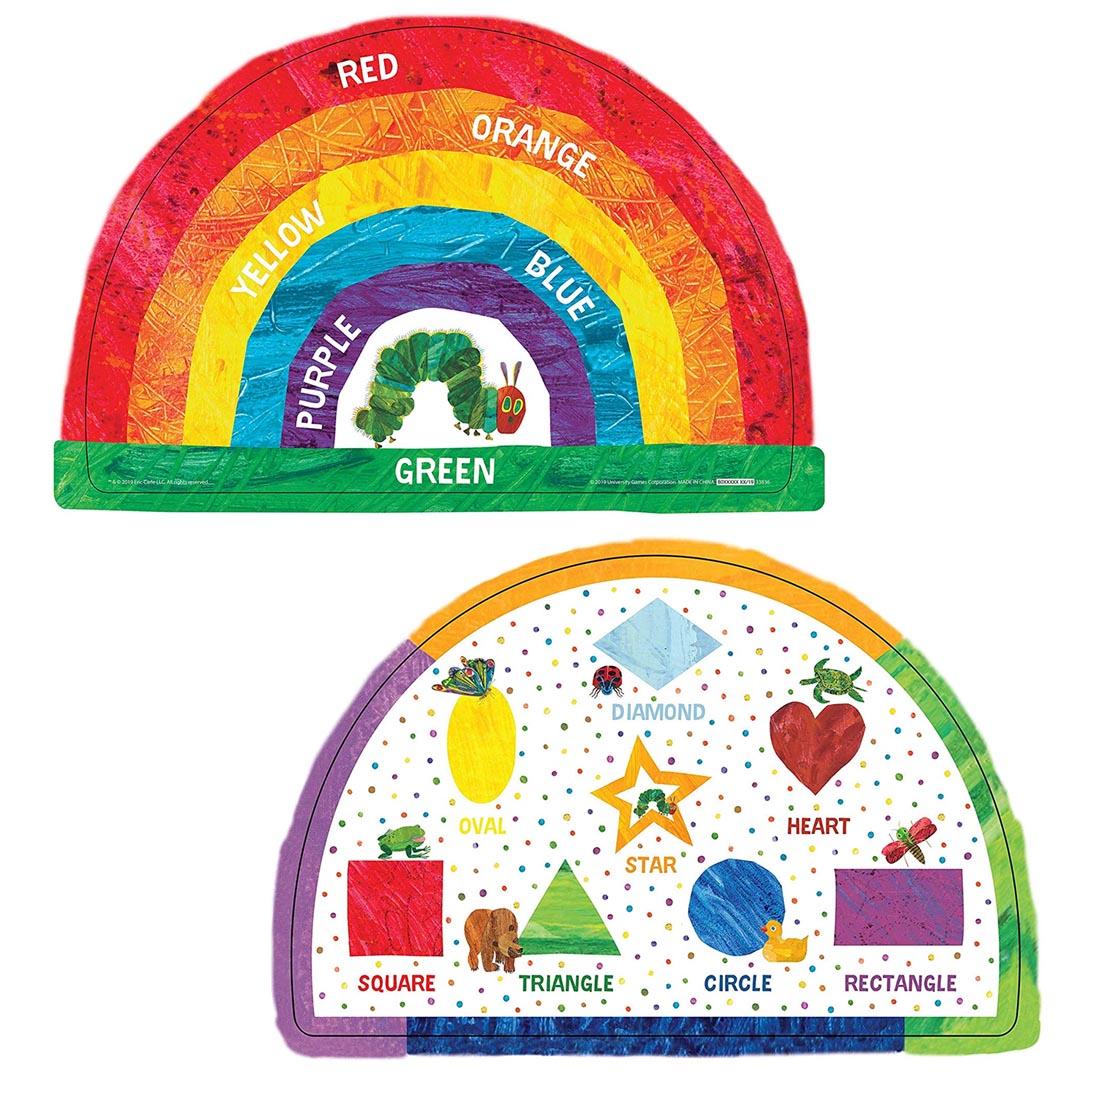 Both sides of the The Very Hungry Caterpillar 2-Sided Floor Puzzle